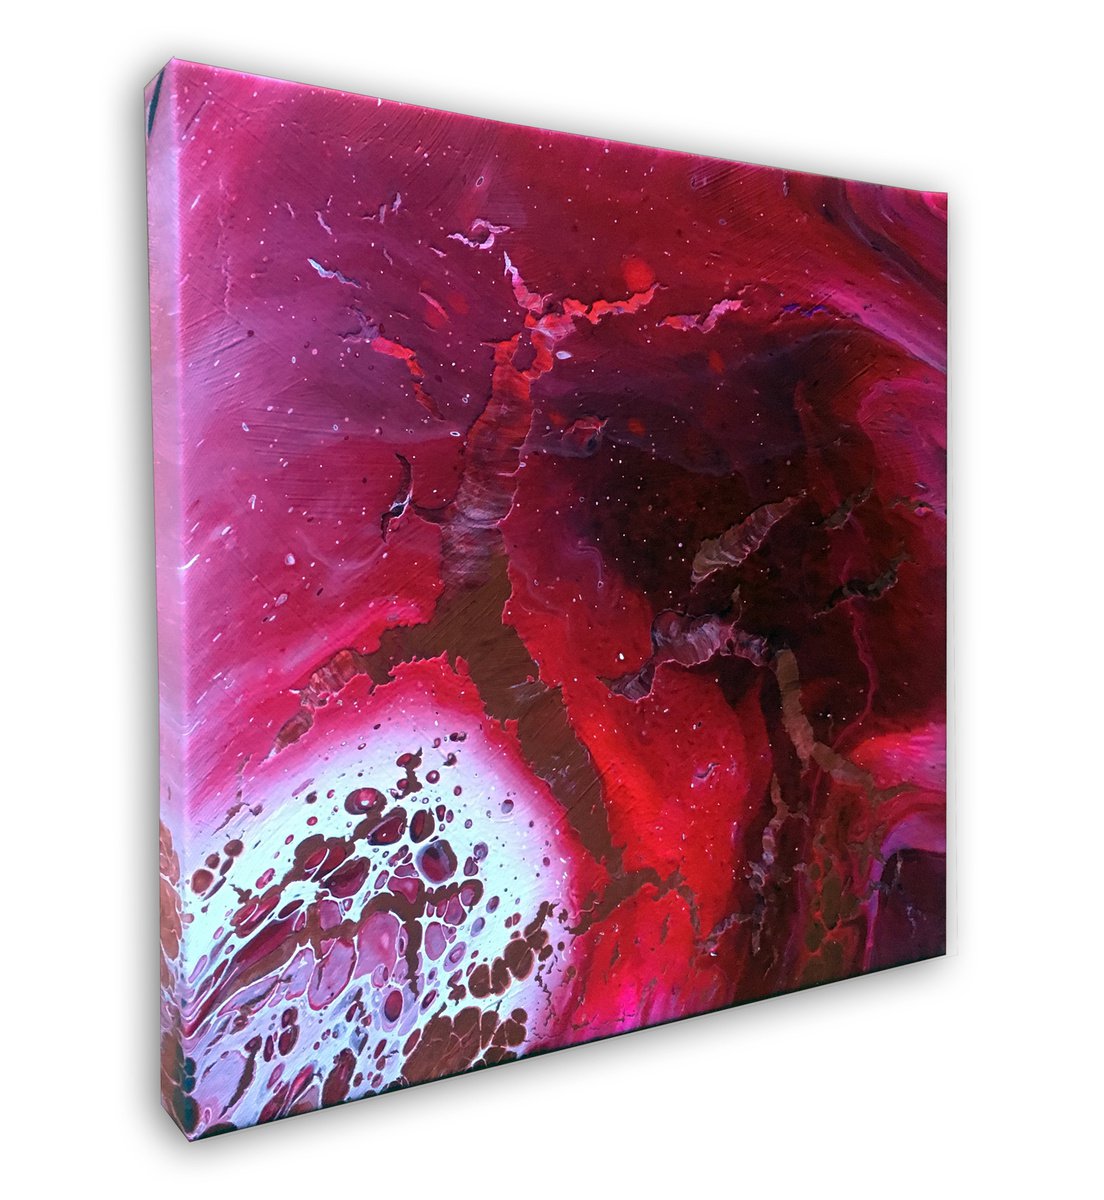 Break My Heart - Original Abstract PMS Fluid Acrylic Painting - 13.5 x 13.5 inches by Preston M. Smith (PMS)